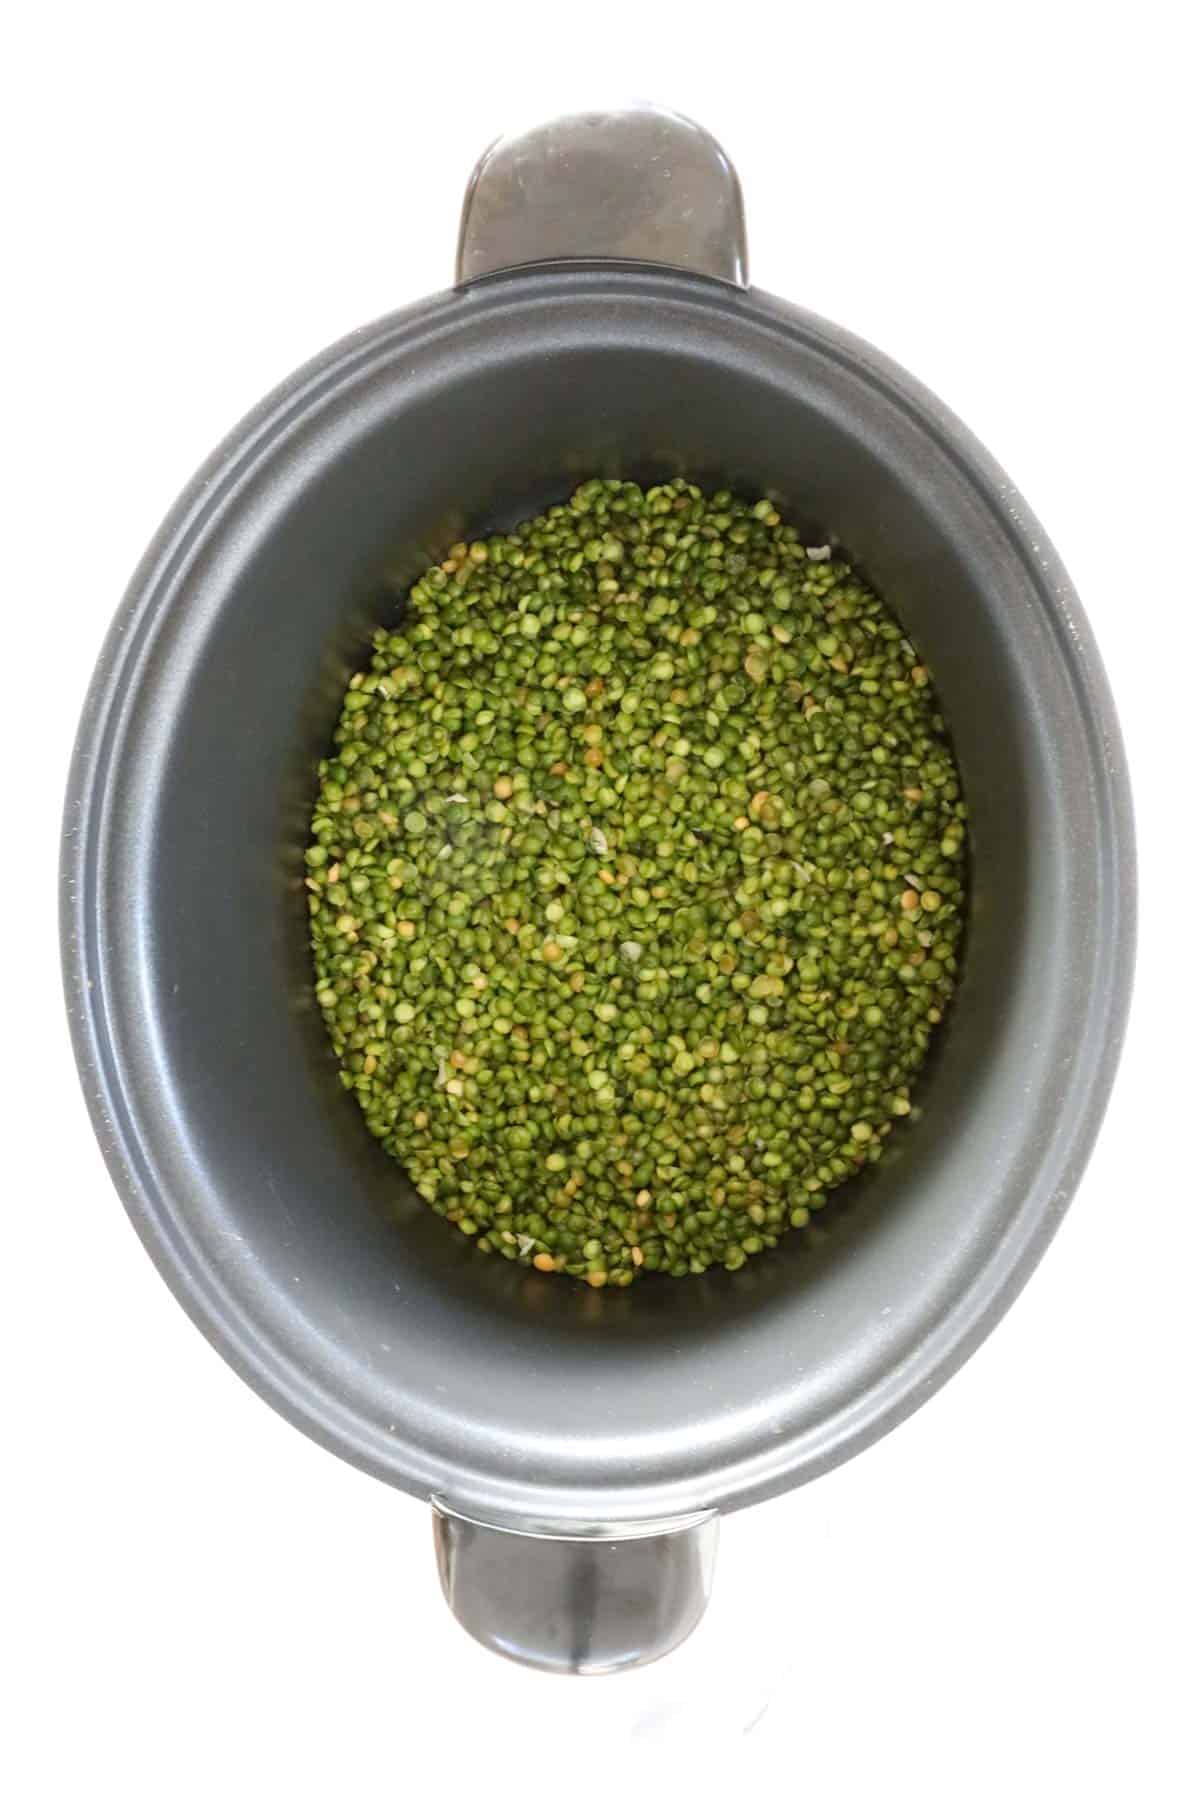 Rinsed green split peas in the bottom of a slow cooker.